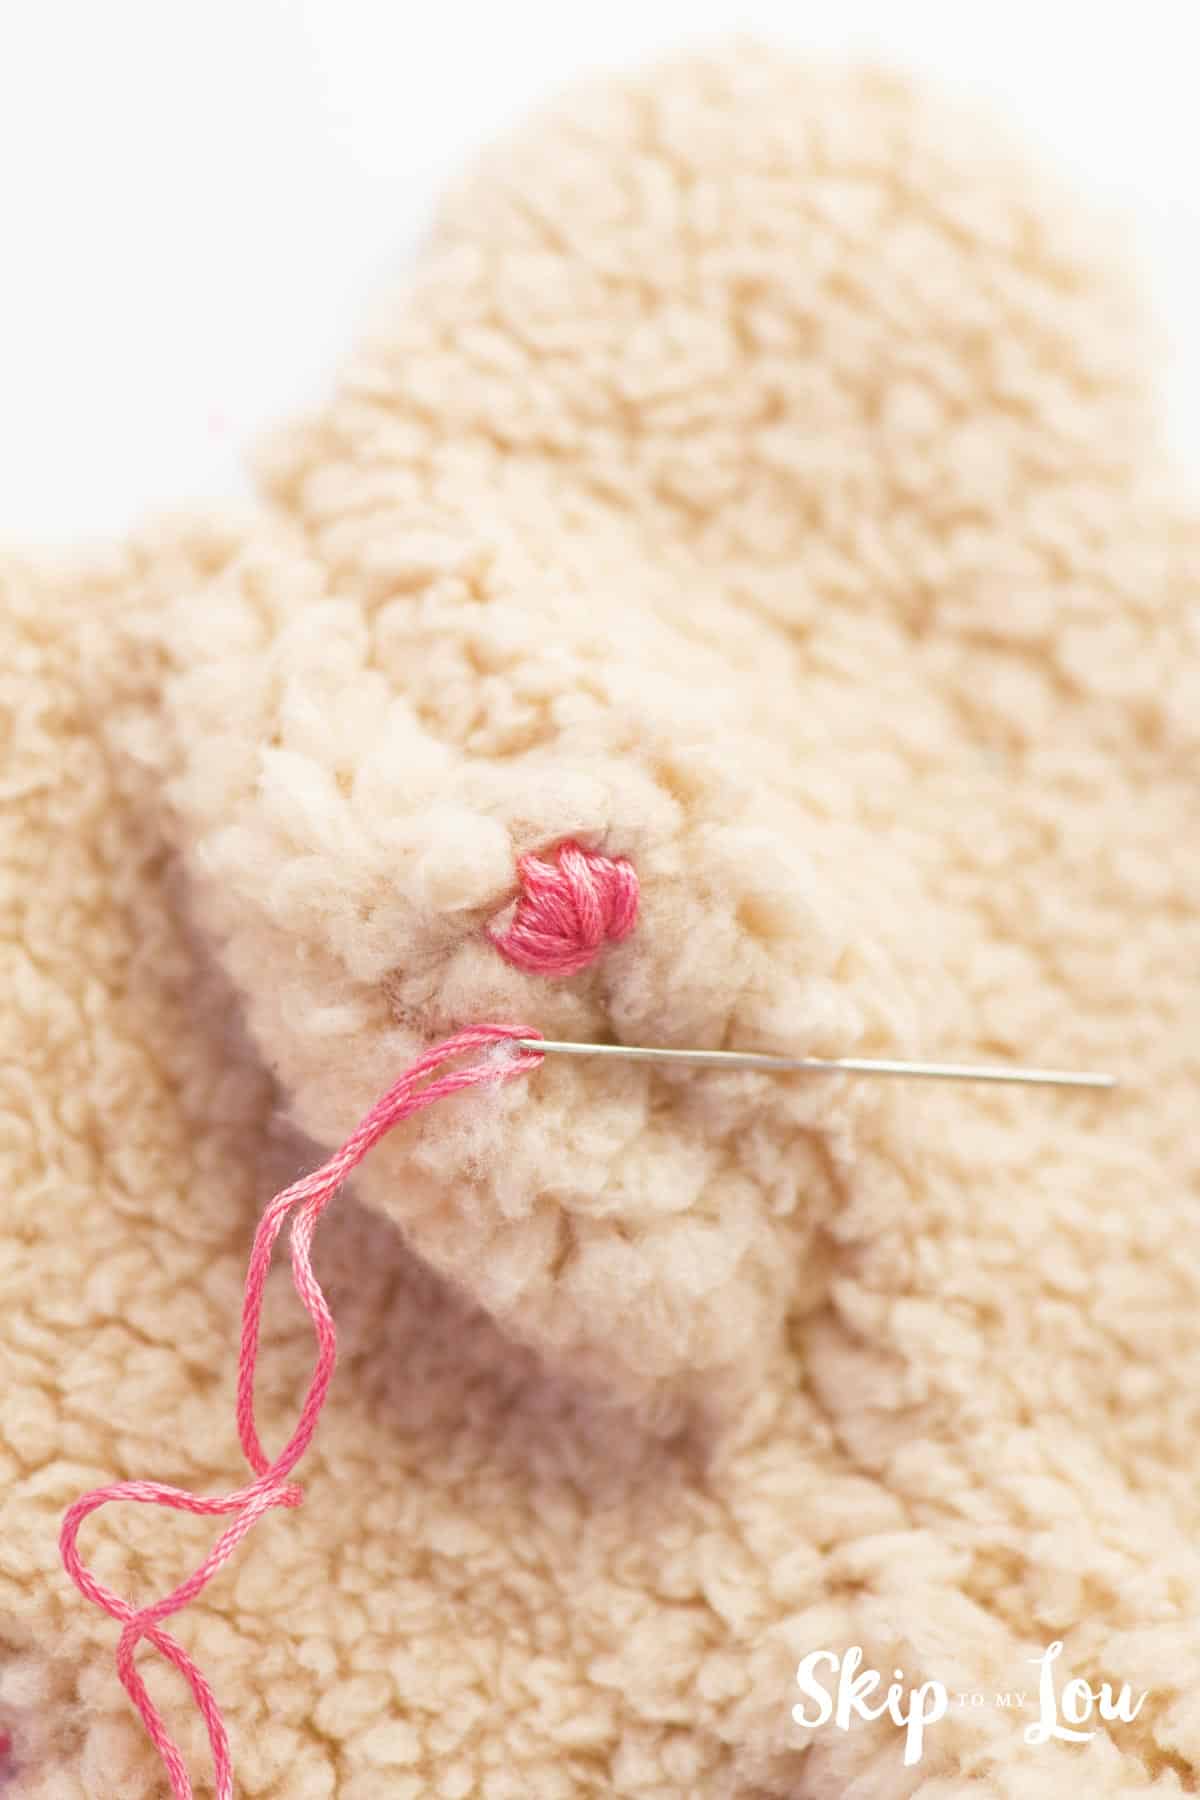 add nose to bear with embroidery floss